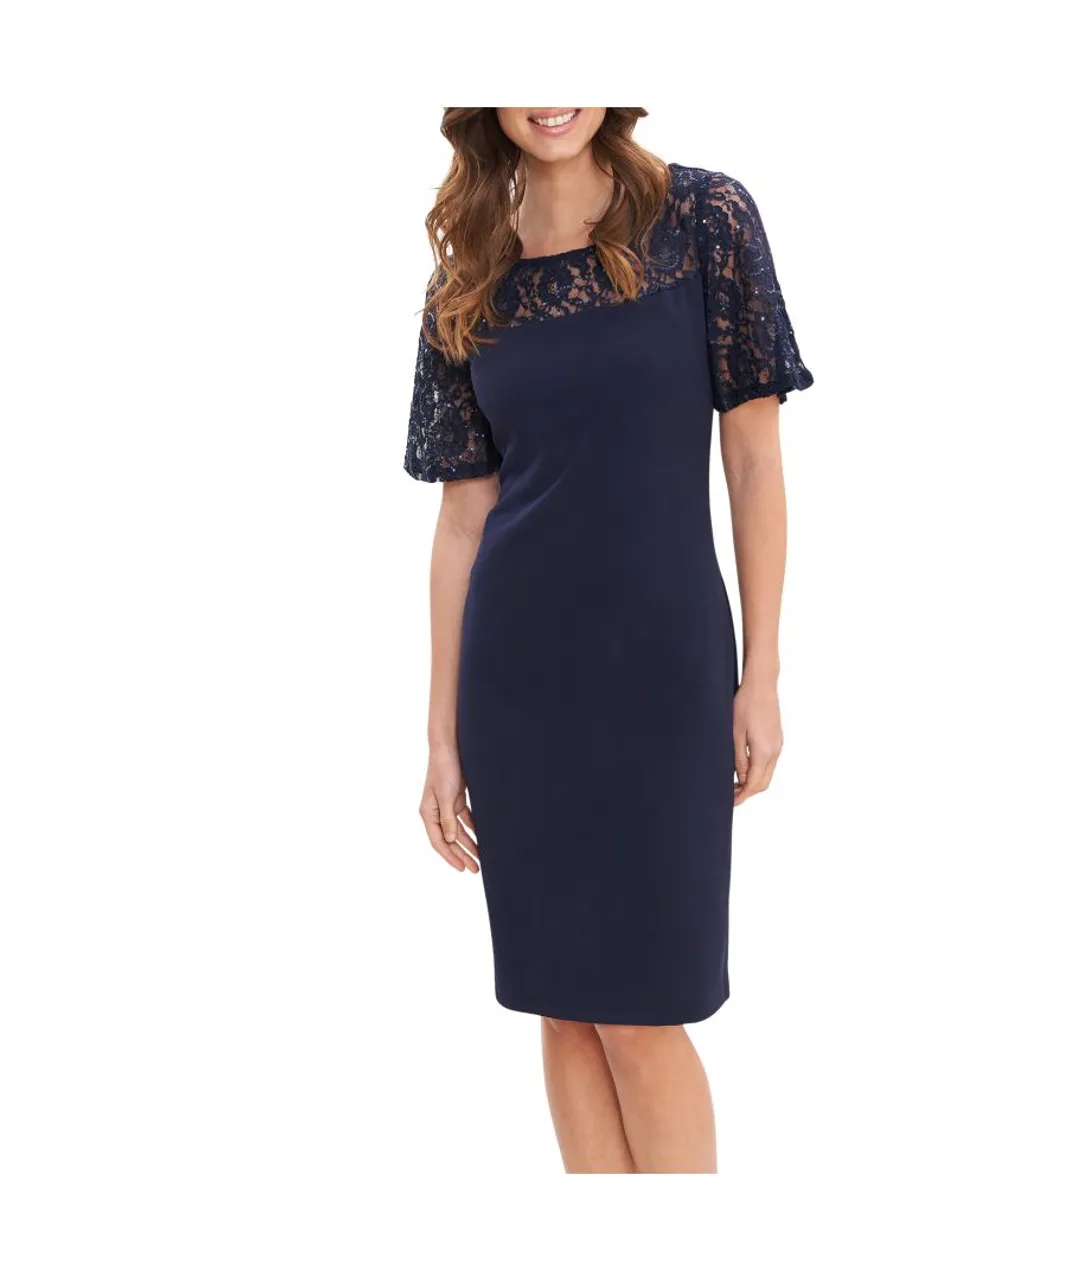 Gina Bacconi Womens Imola Lace Cocktail Dress With Embroidered Yoke - Navy